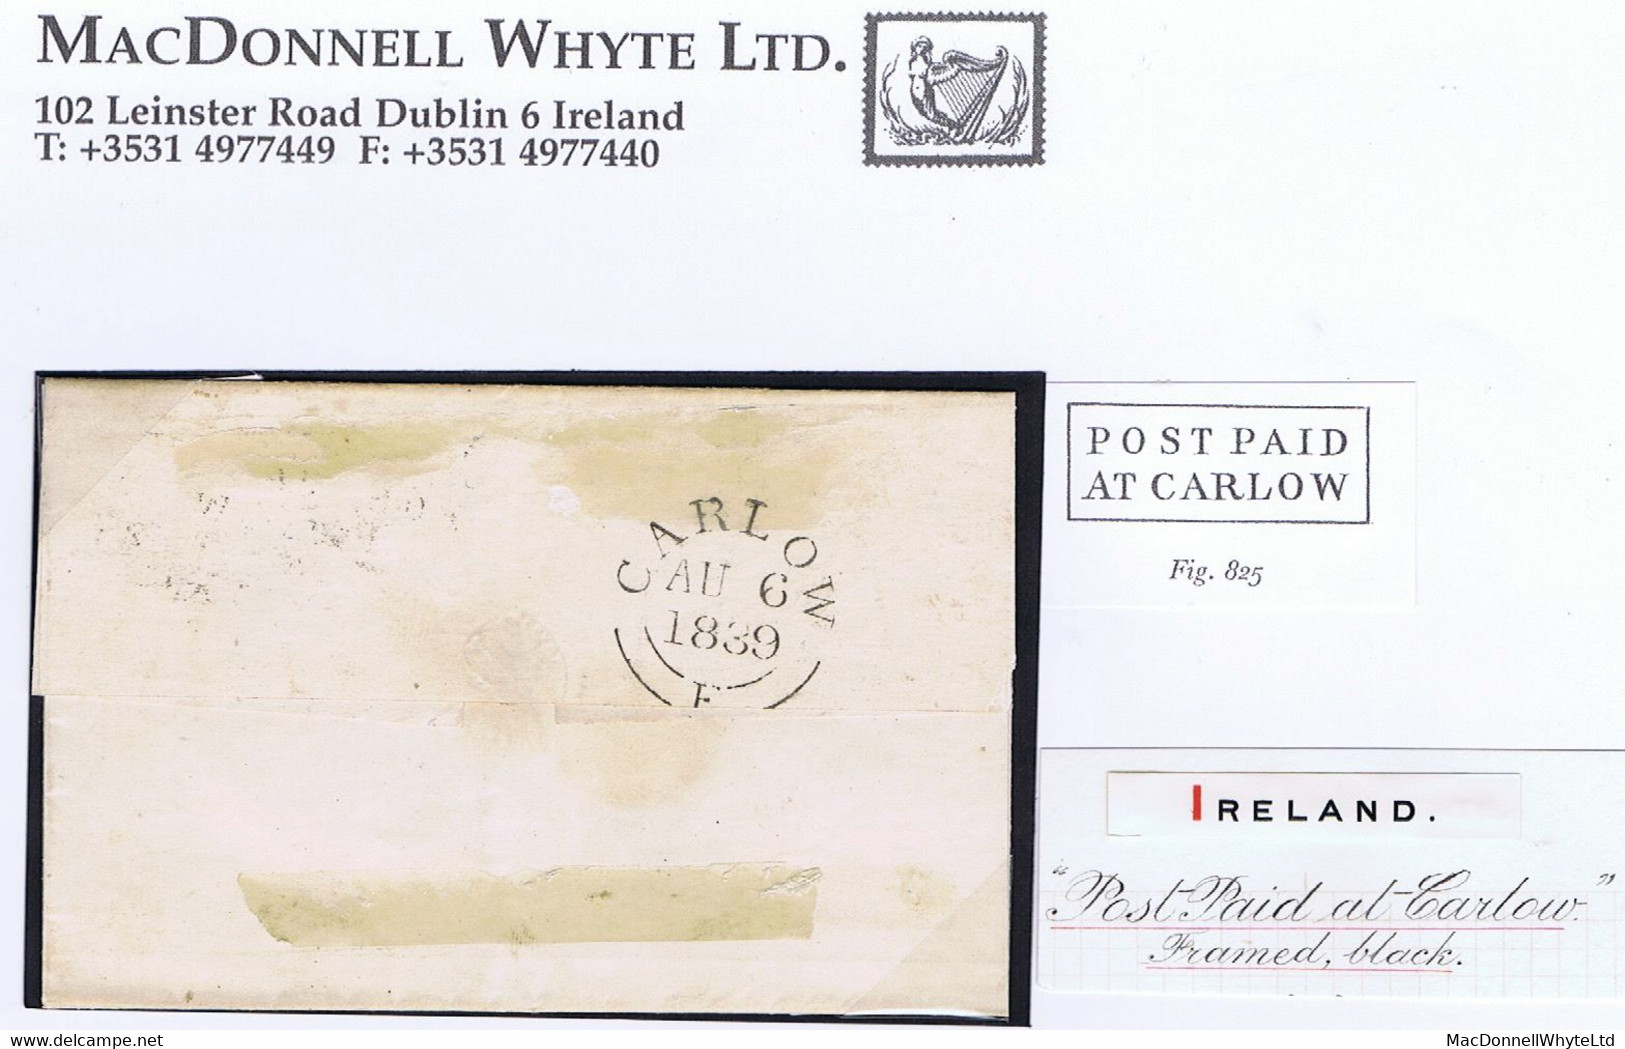 Ireland Carlow 1839 Cover To Dublin Paid '6' With Boxed POST PAID/AT CARLOW, Backstamped CARLOW AU 6 1839 - Prephilately